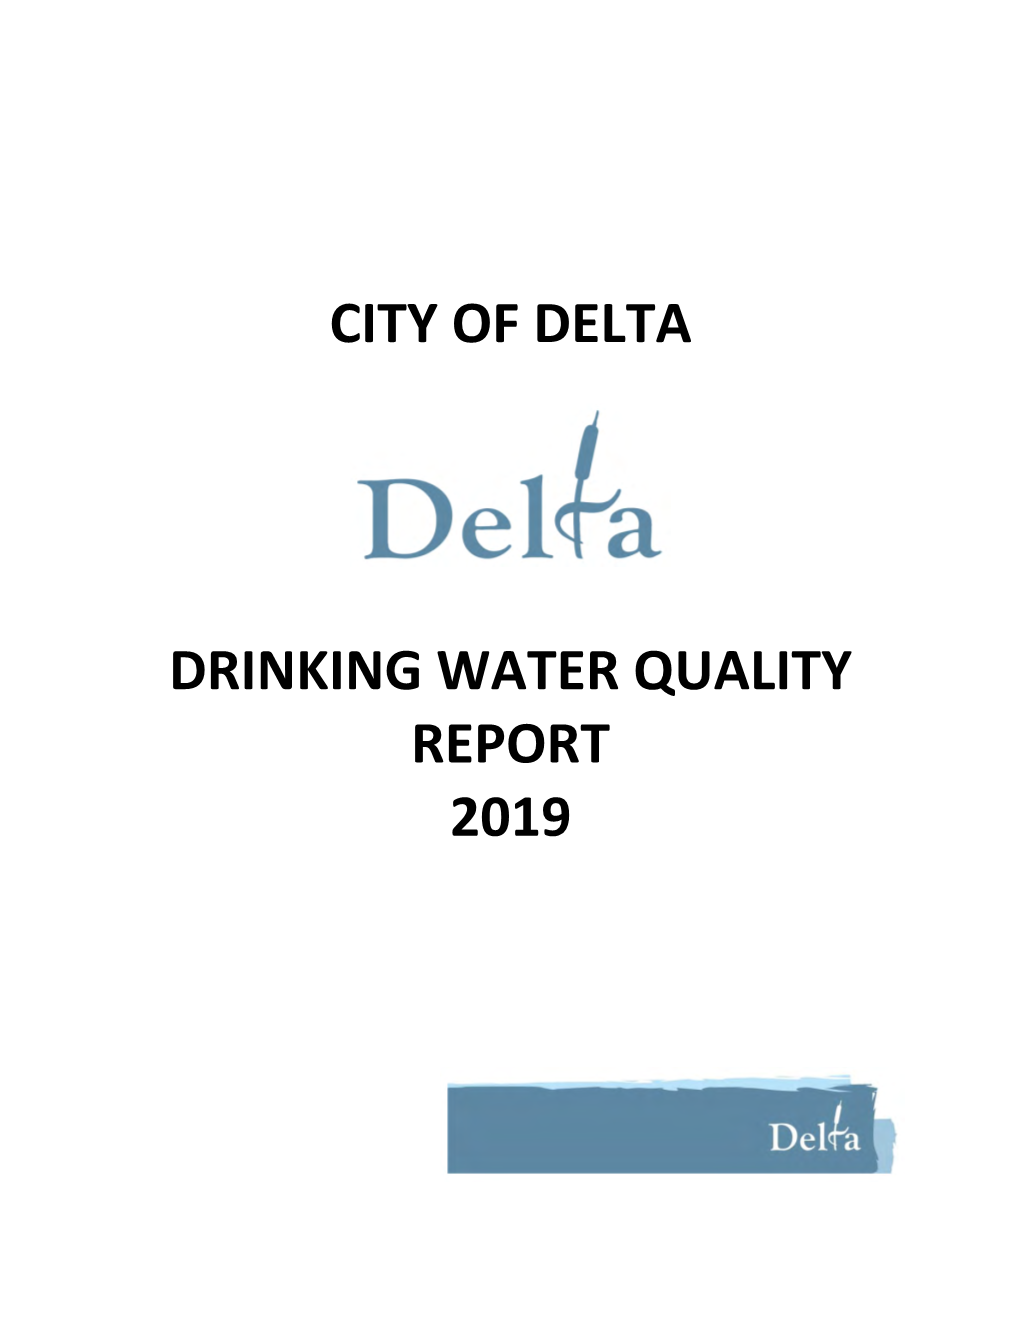 City of Delta Drinking Water Quality Report 2019